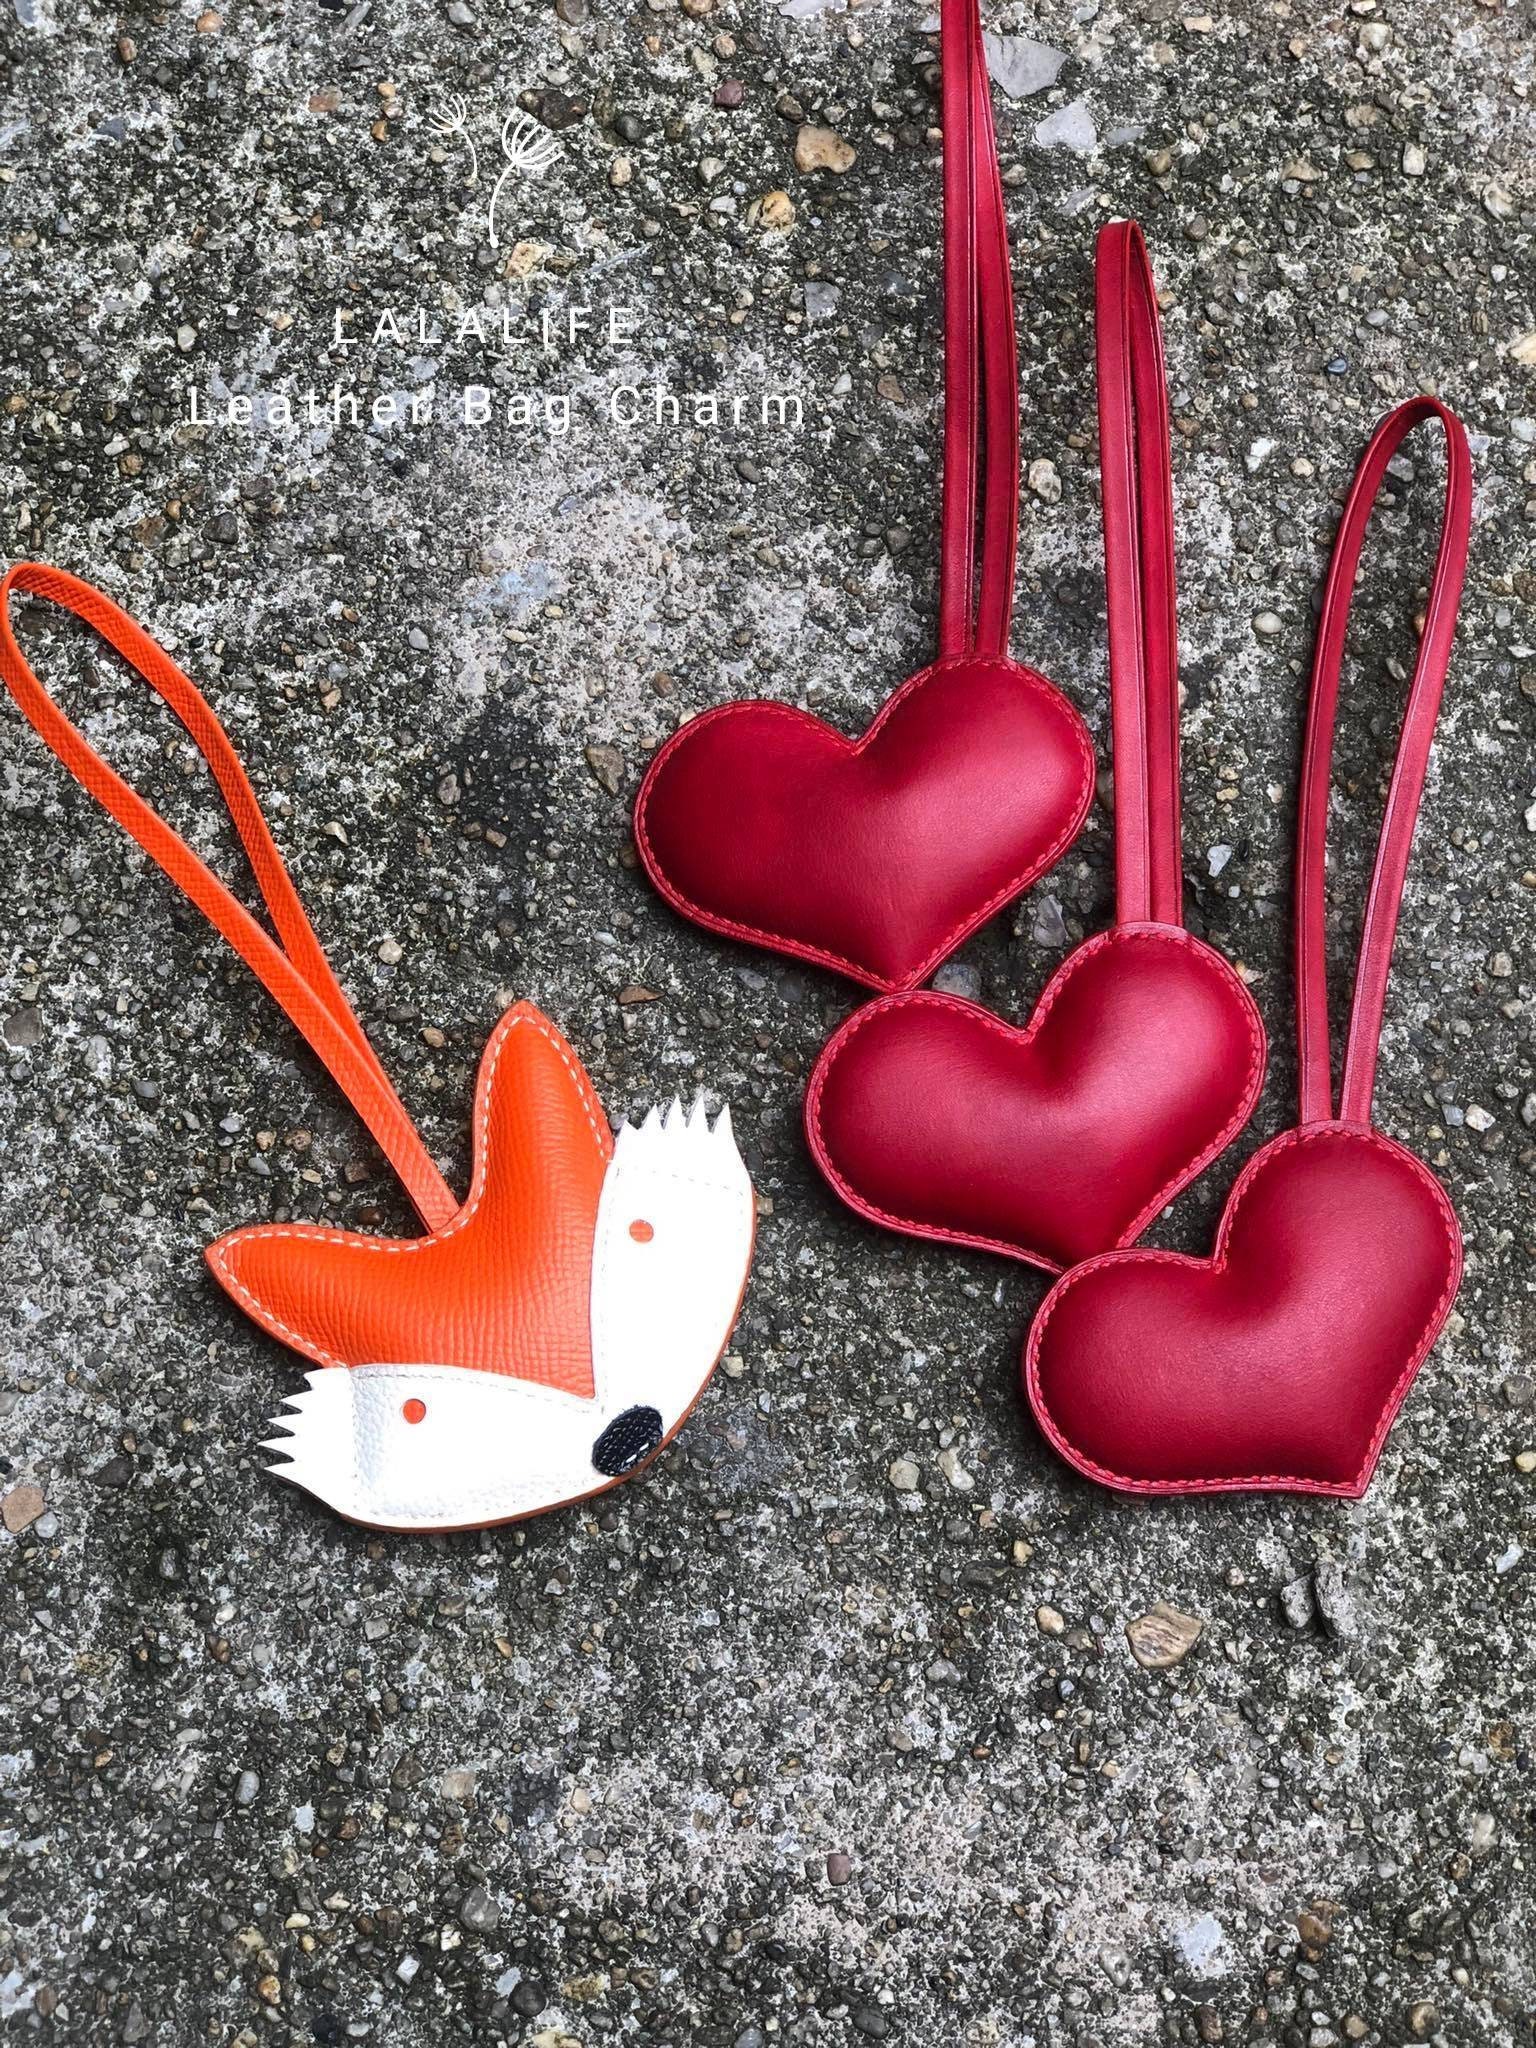 New Charmed Heart designer bag charms online now! — Shh by Sadie